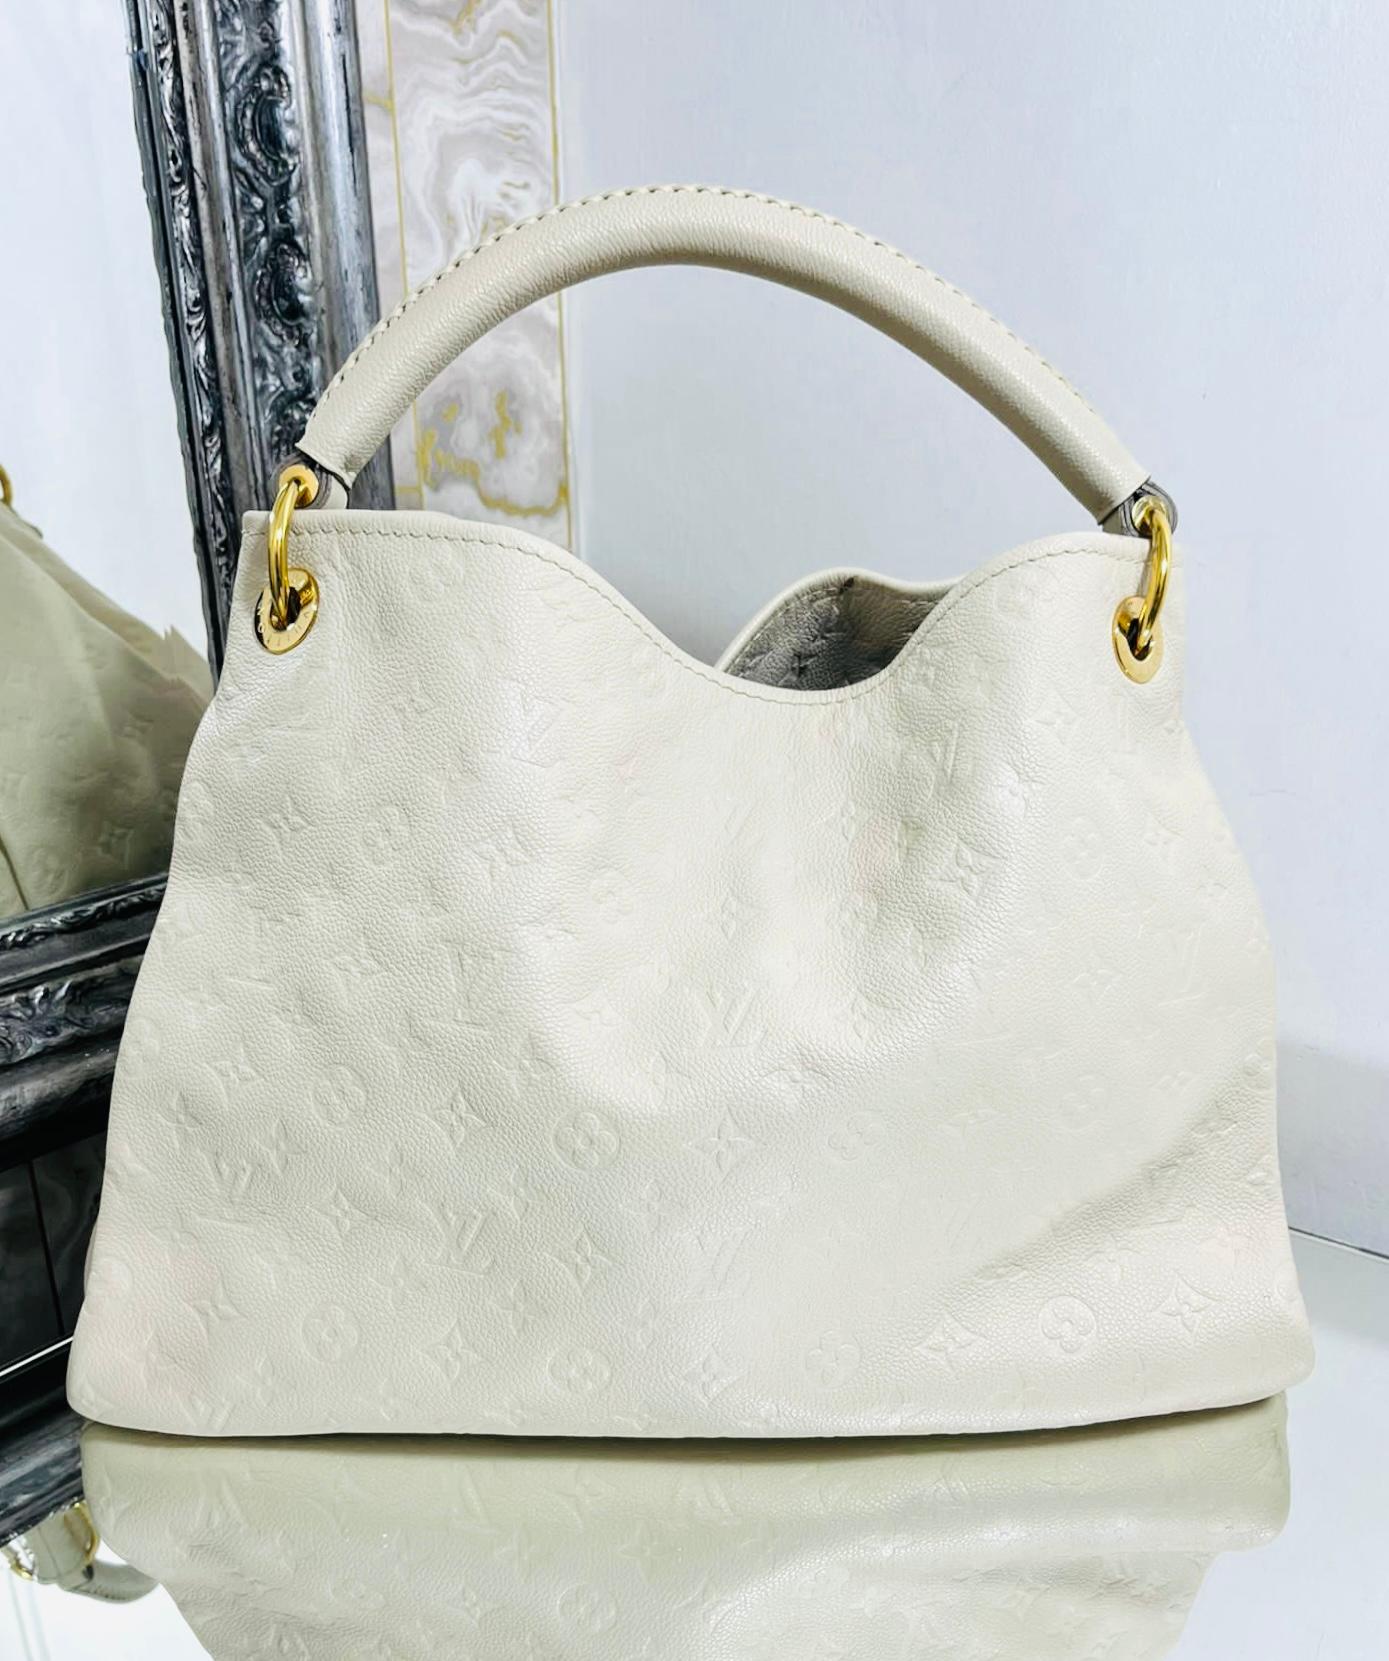 Louis Vuitton Leather Artsy Tote Bag In Fair Condition For Sale In London, GB